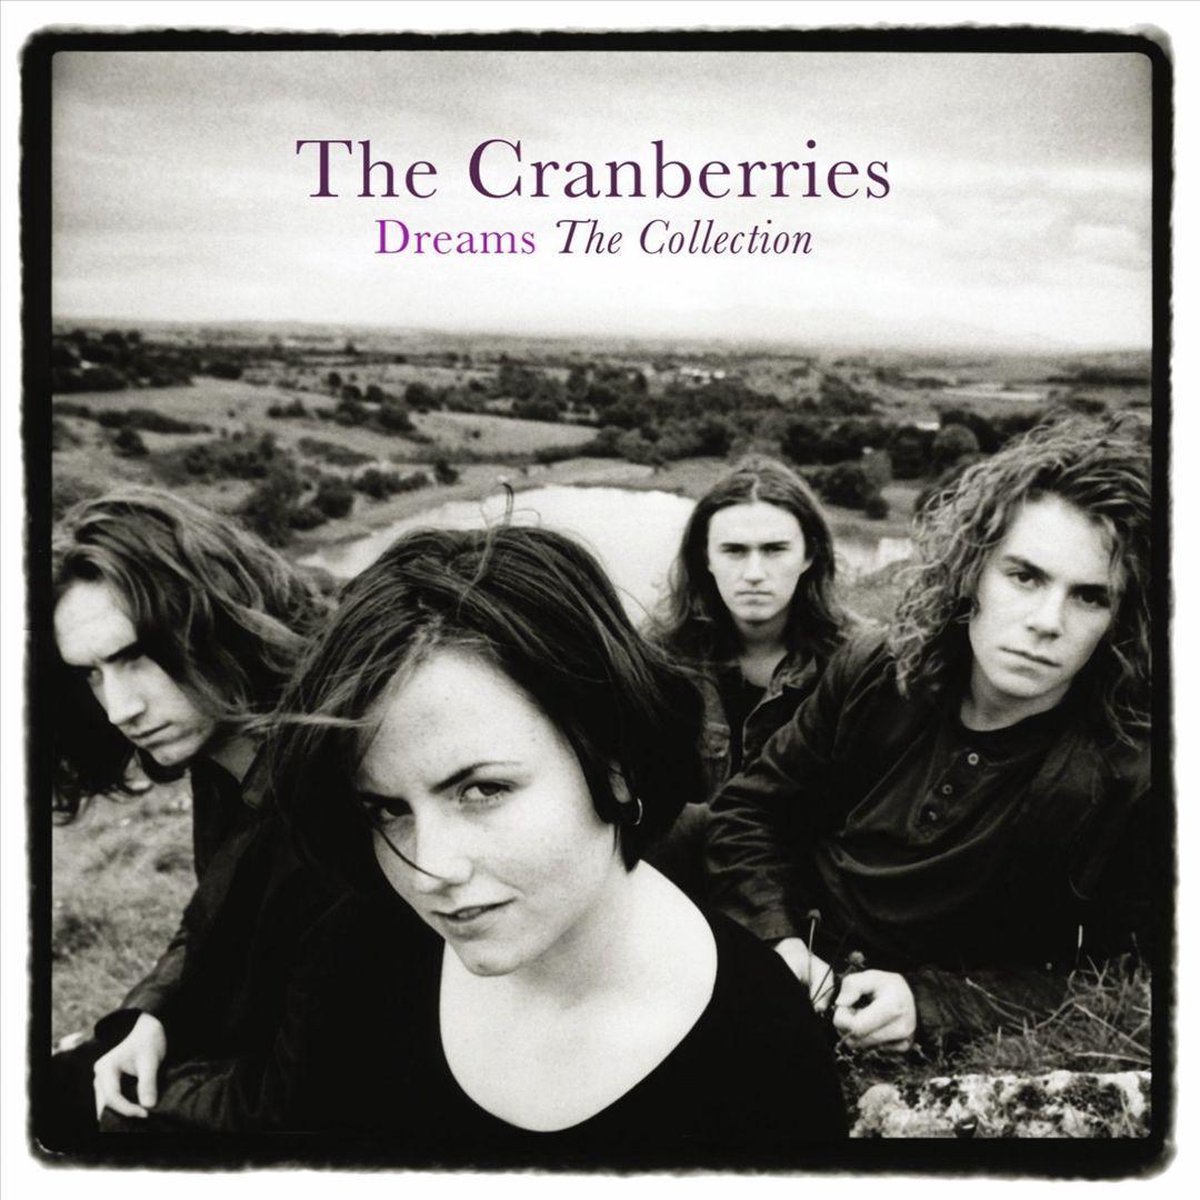 Dreams: The Collection - Cranberries - the Cranberries